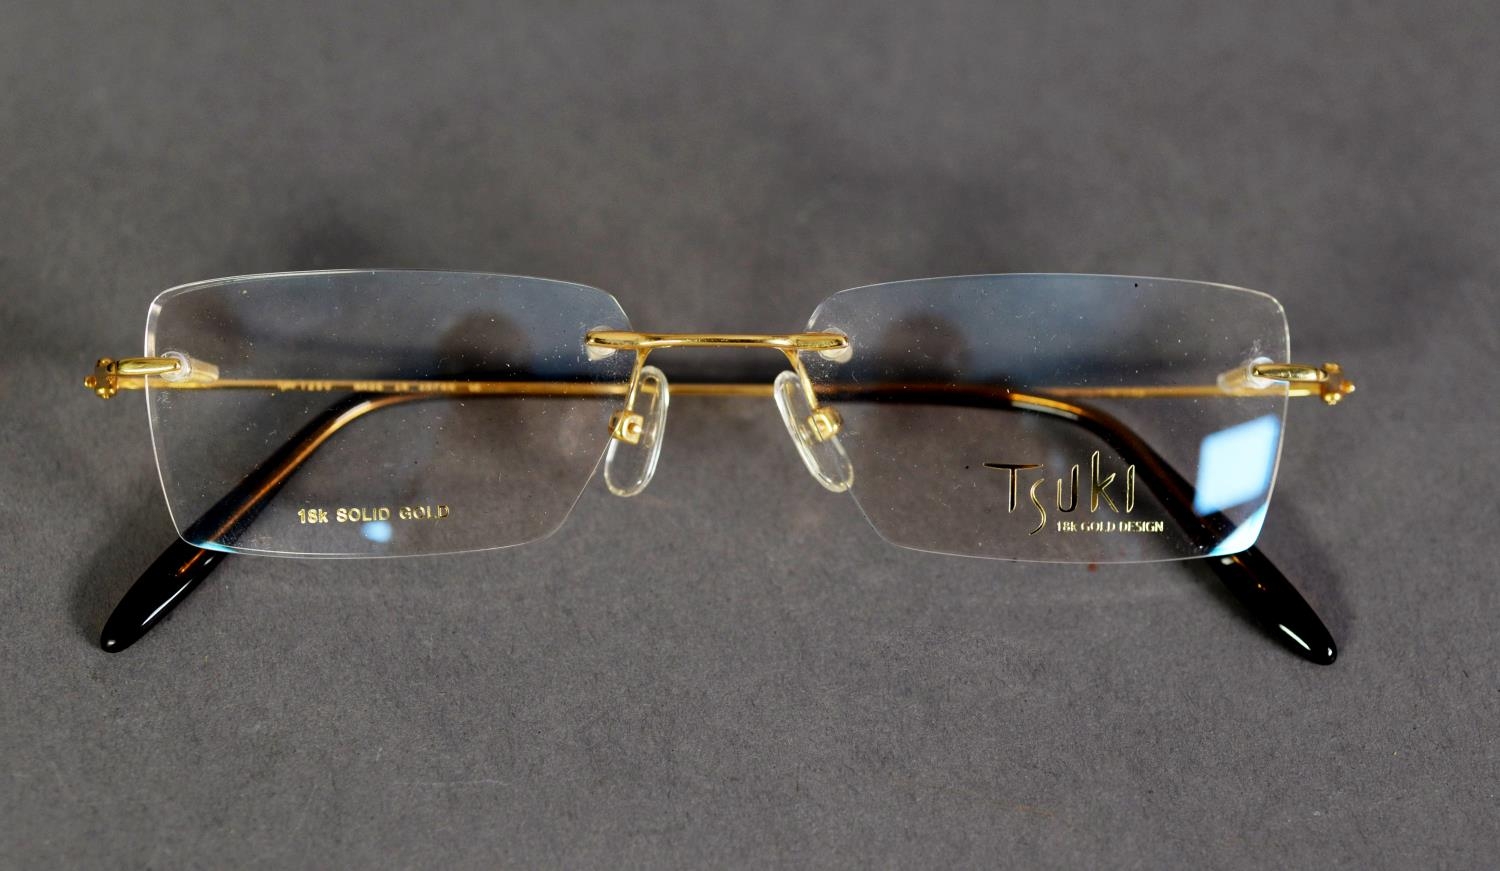 PAIR OF TSUKI (JAPANESE) 18k GOLD FRAMED UNISEX SPECTACLES, in case with certification card as